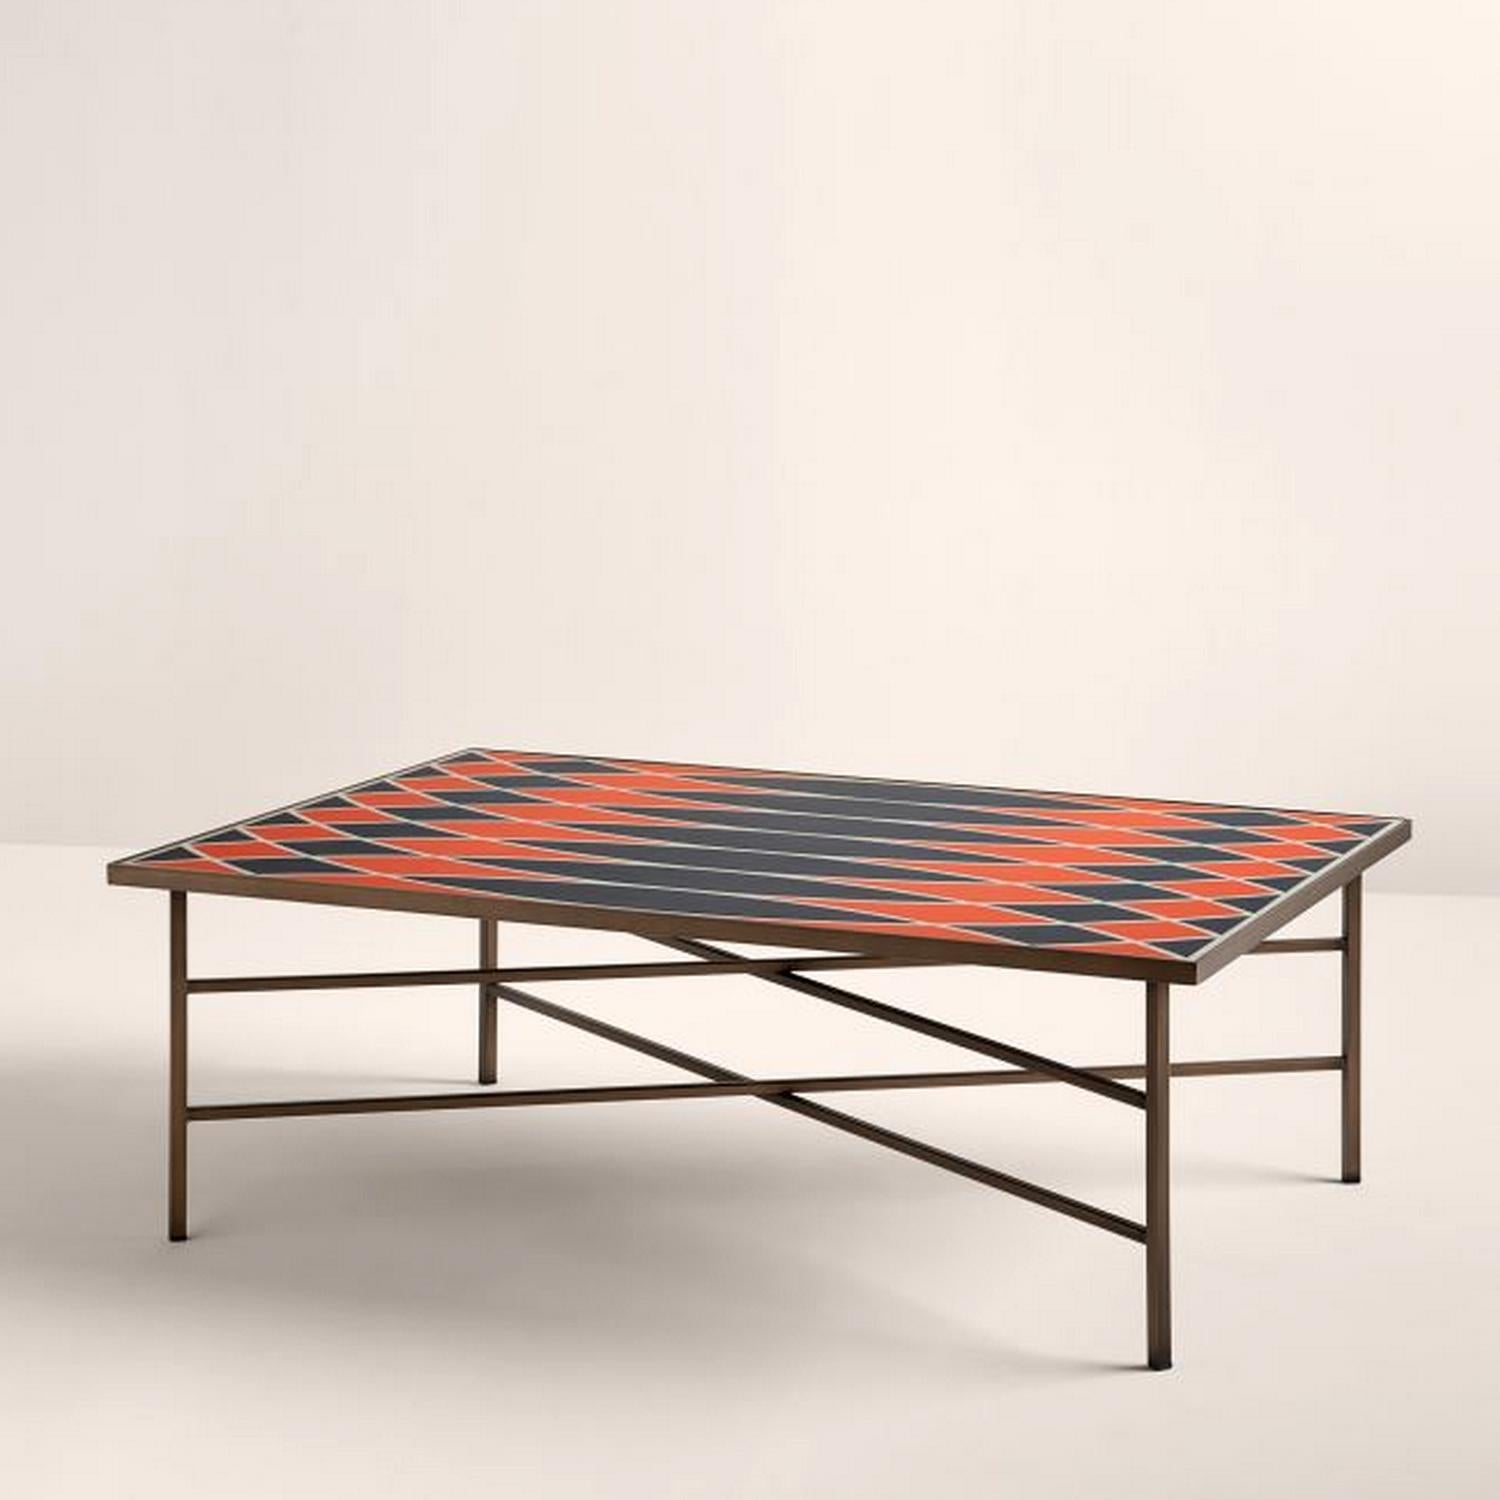 Italian In Stock in Los Angeles, Motif Coffee Table by Analogia Project, Made in Italy